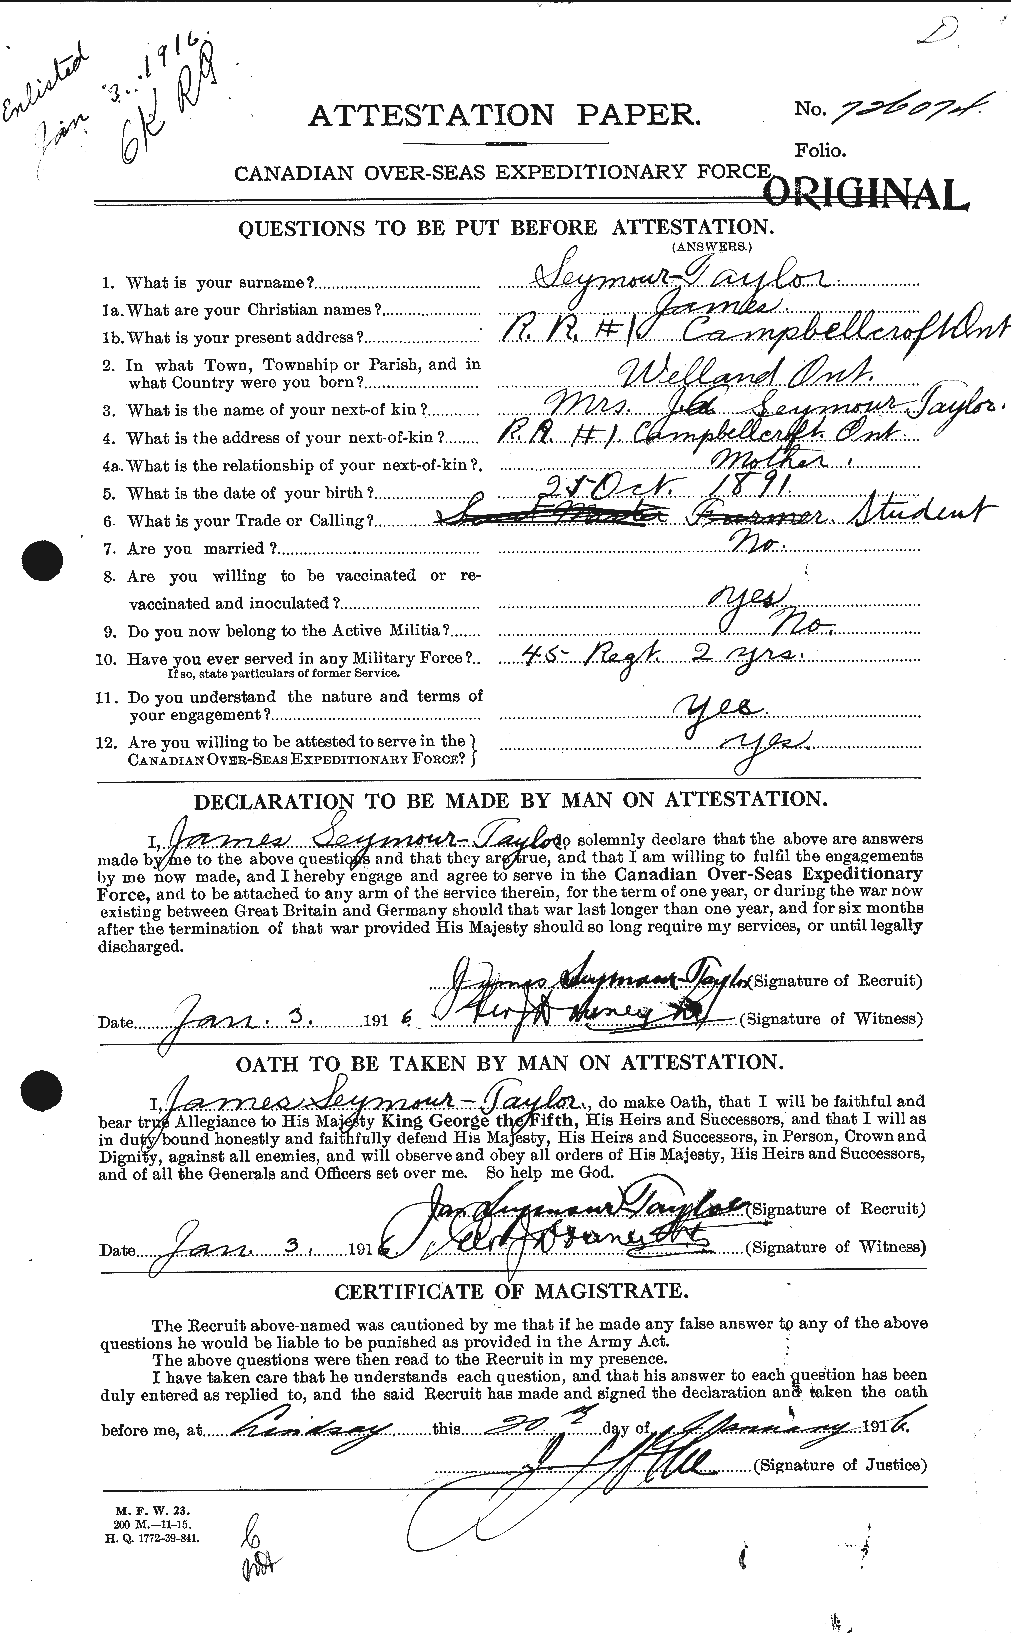 Personnel Records of the First World War - CEF 088279a